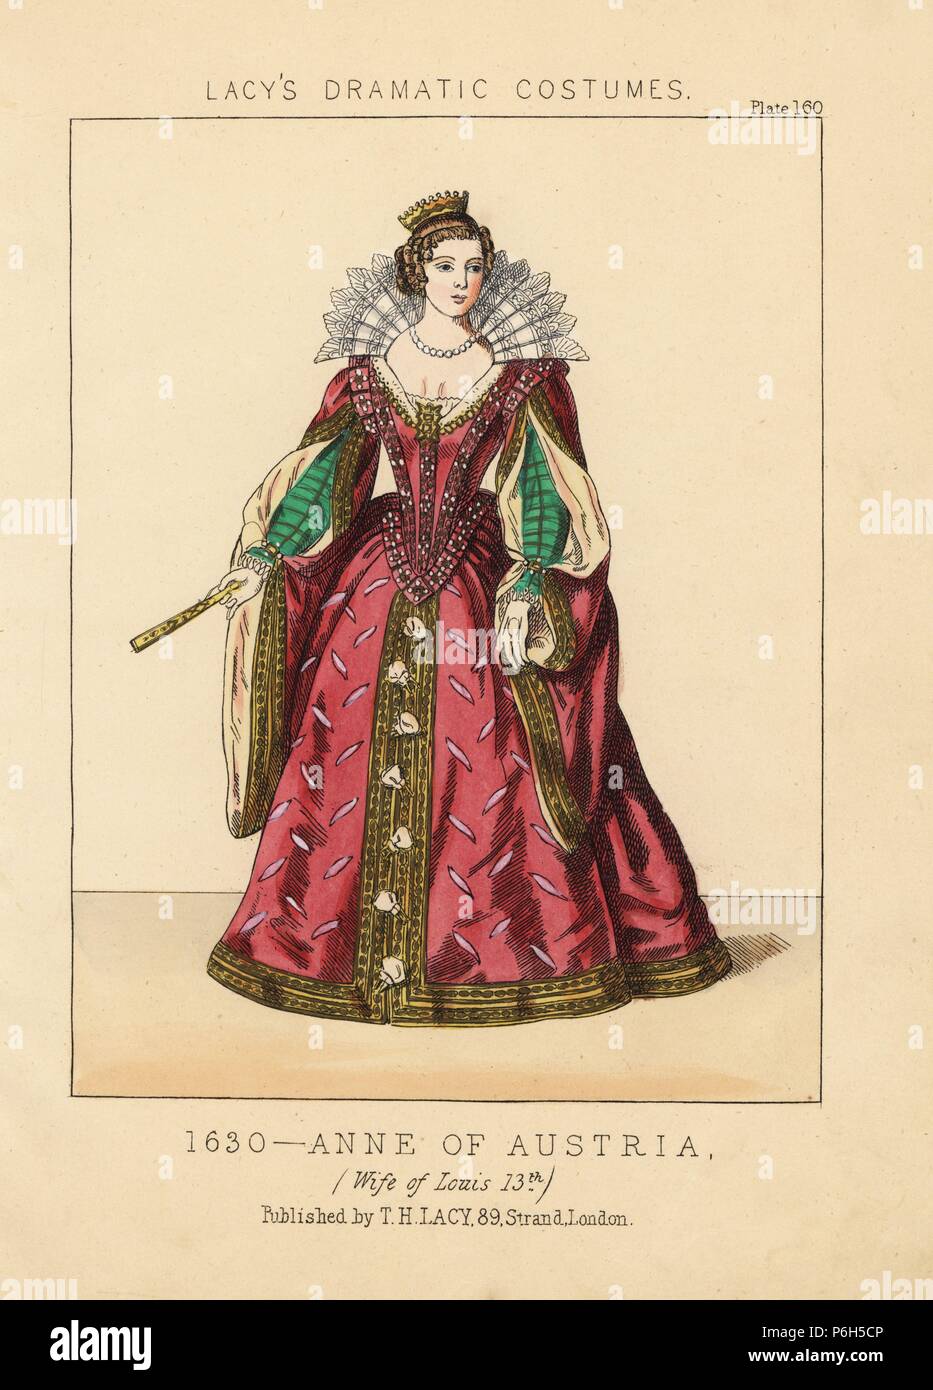 Anne of Austria, wife of Louis XIII, 1630. Handcoloured lithograph from Thomas Hailes Lacy's 'Female Costumes Historical, National and Dramatic in 200 Plates,' London, 1865. Lacy (1809-1873) was a British actor, playwright, theatrical manager and publisher. Stock Photo